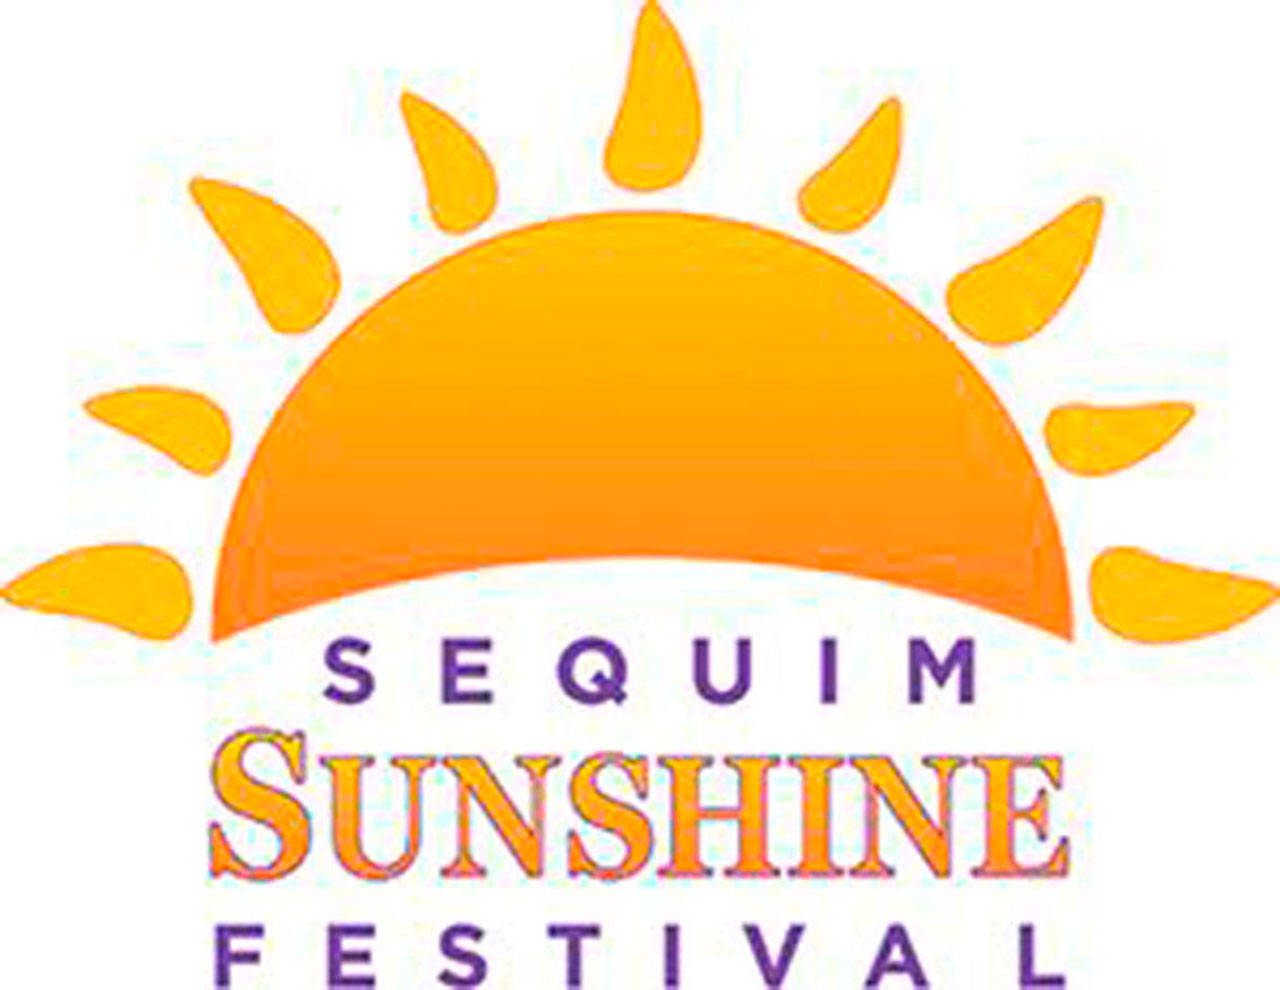 The Sequim Sunshine Festival tentatively returns on March 5-6, 2021, with limited and modified events due to COVID-19 regulations. Submitted photo